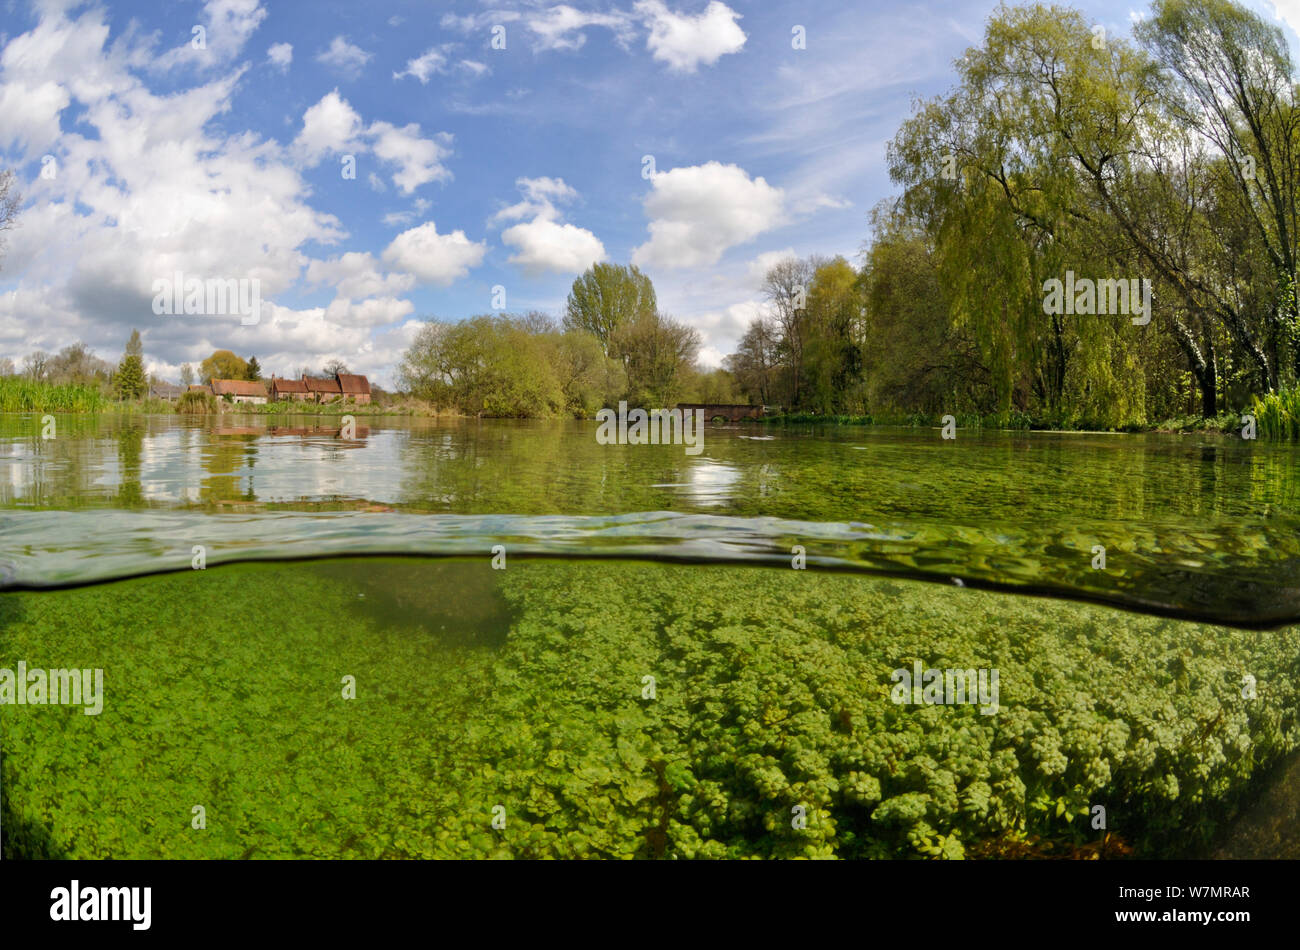 Split level view of the River Itchen, with aquatic plants: Blunt-fruited Water-starwort (Callitriche obtusangula). Itchen Stoke Mill is visible on the left. Ovington, Hampshire, England, May. Stock Photo